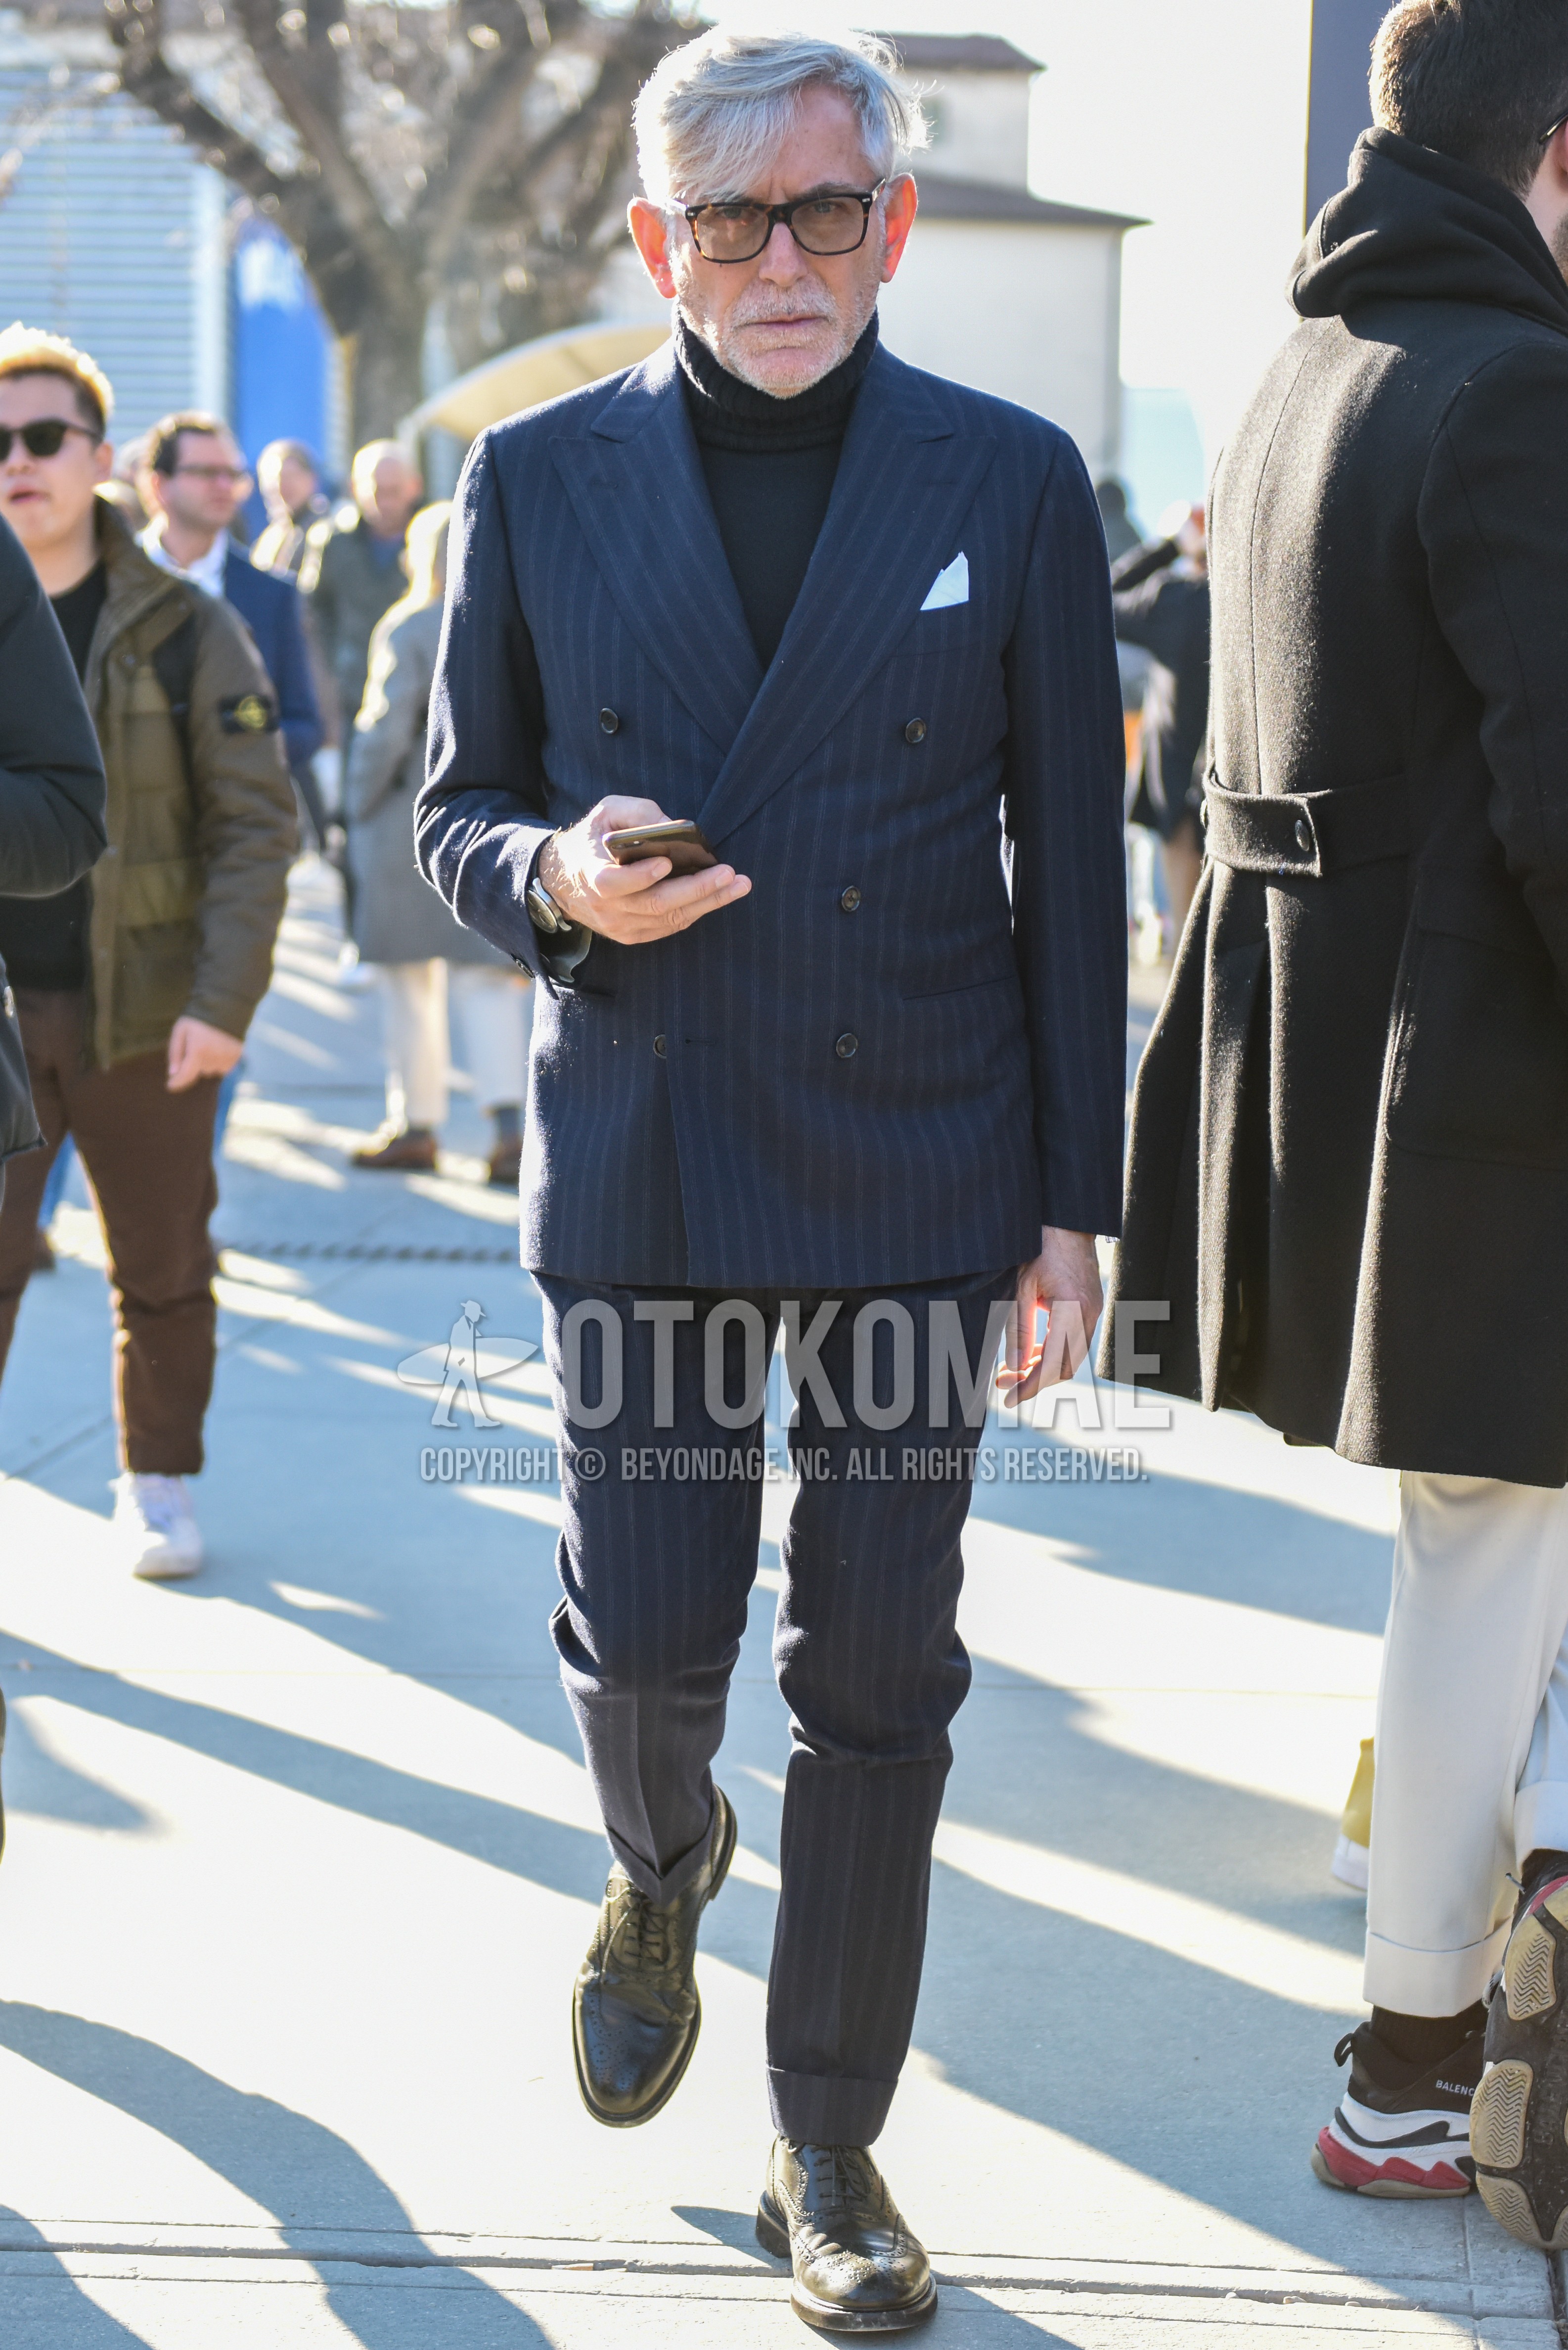 Men's spring autumn outfit with brown tortoiseshell sunglasses, dark gray plain turtleneck knit, black wing-tip shoes leather shoes, gray stripes suit.